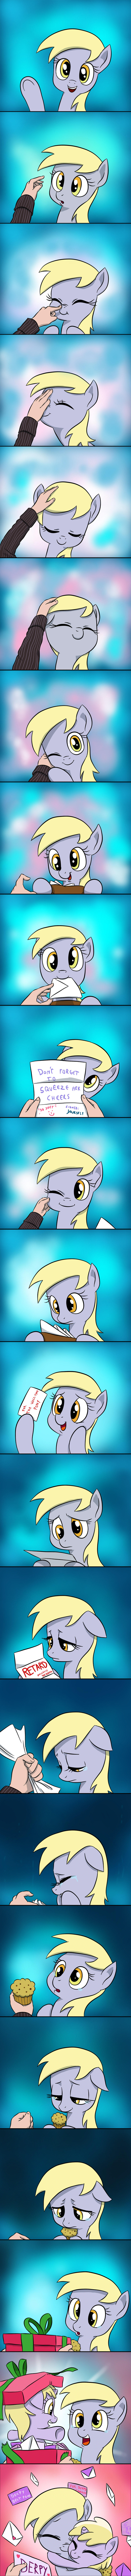 Derpy Simulator by doubleWbrothers